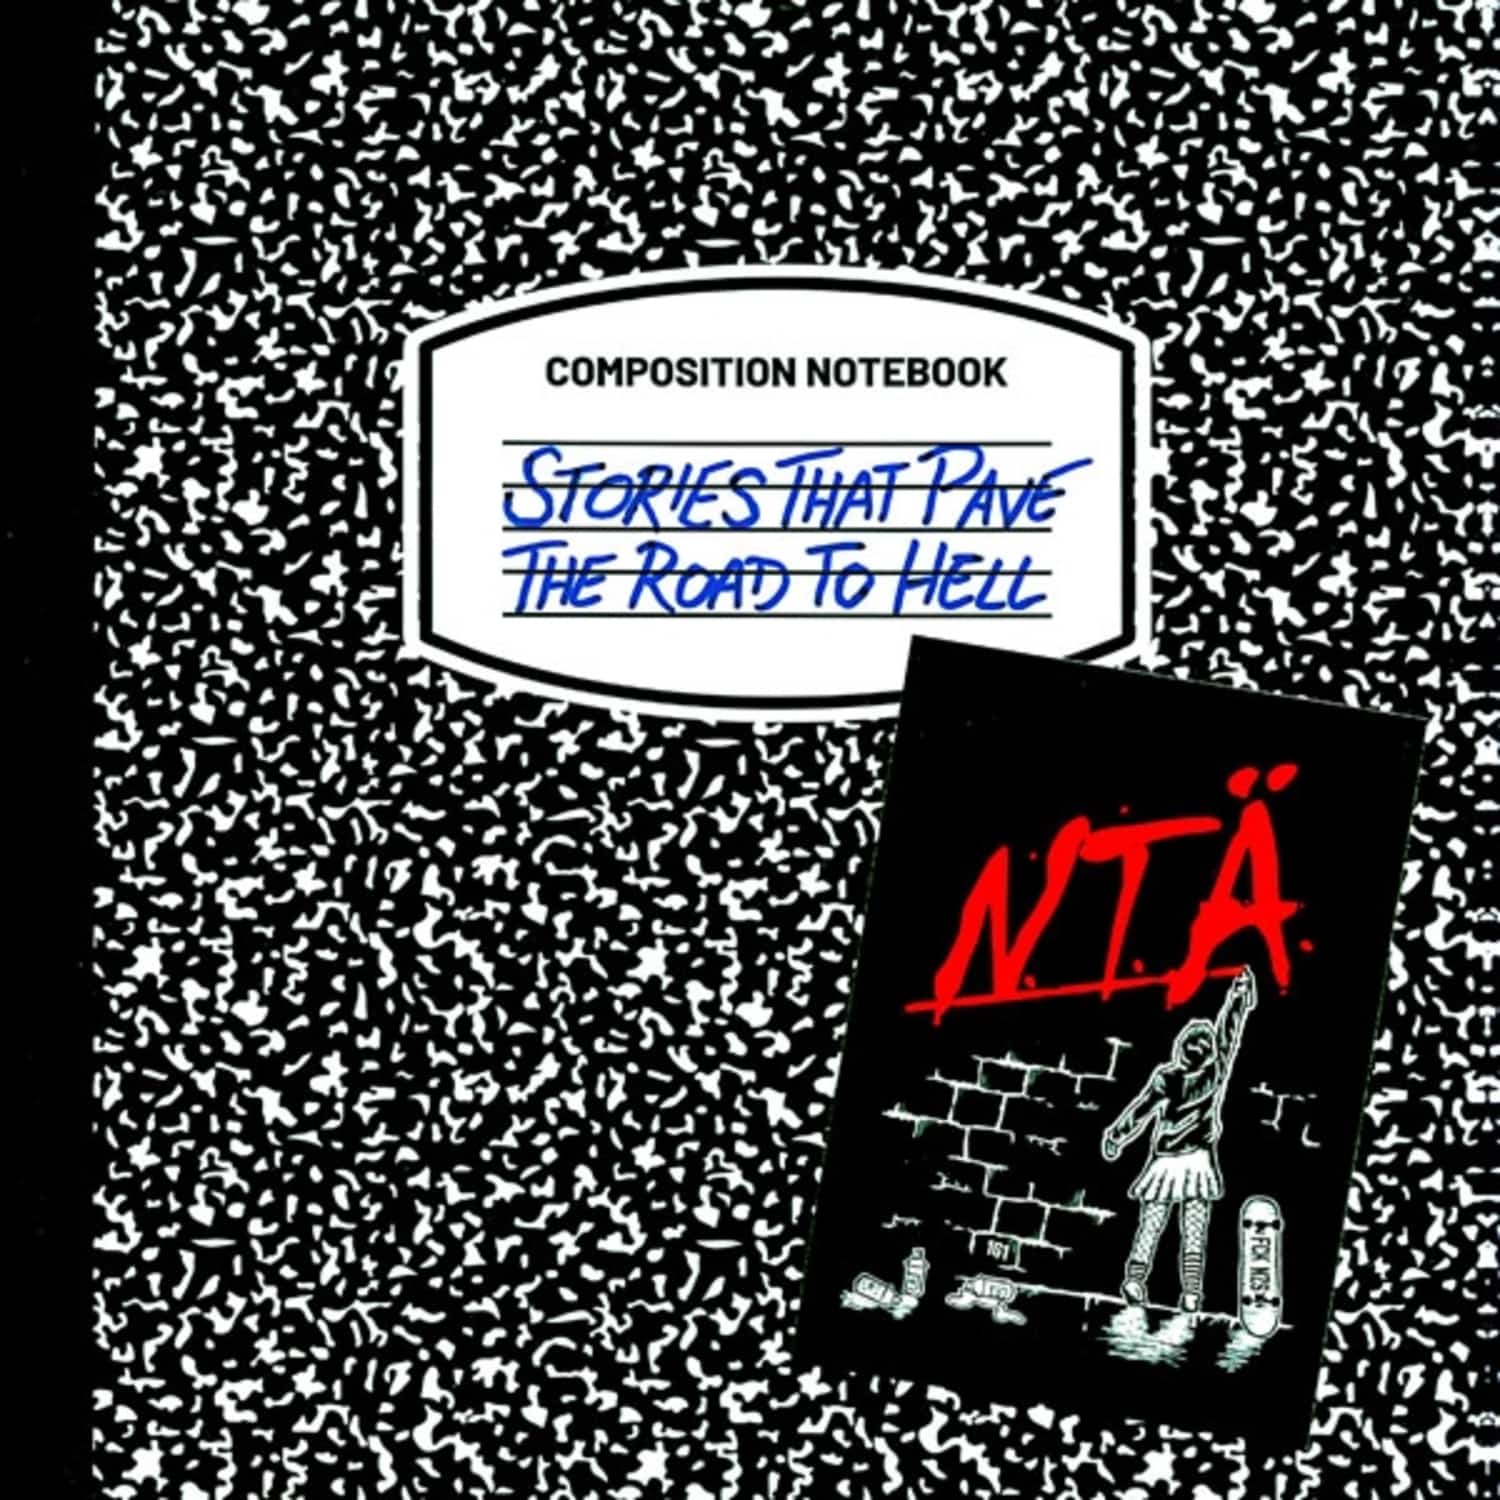 N.T.. - STORIES THAT PAVE THE ROAD TO HELL 